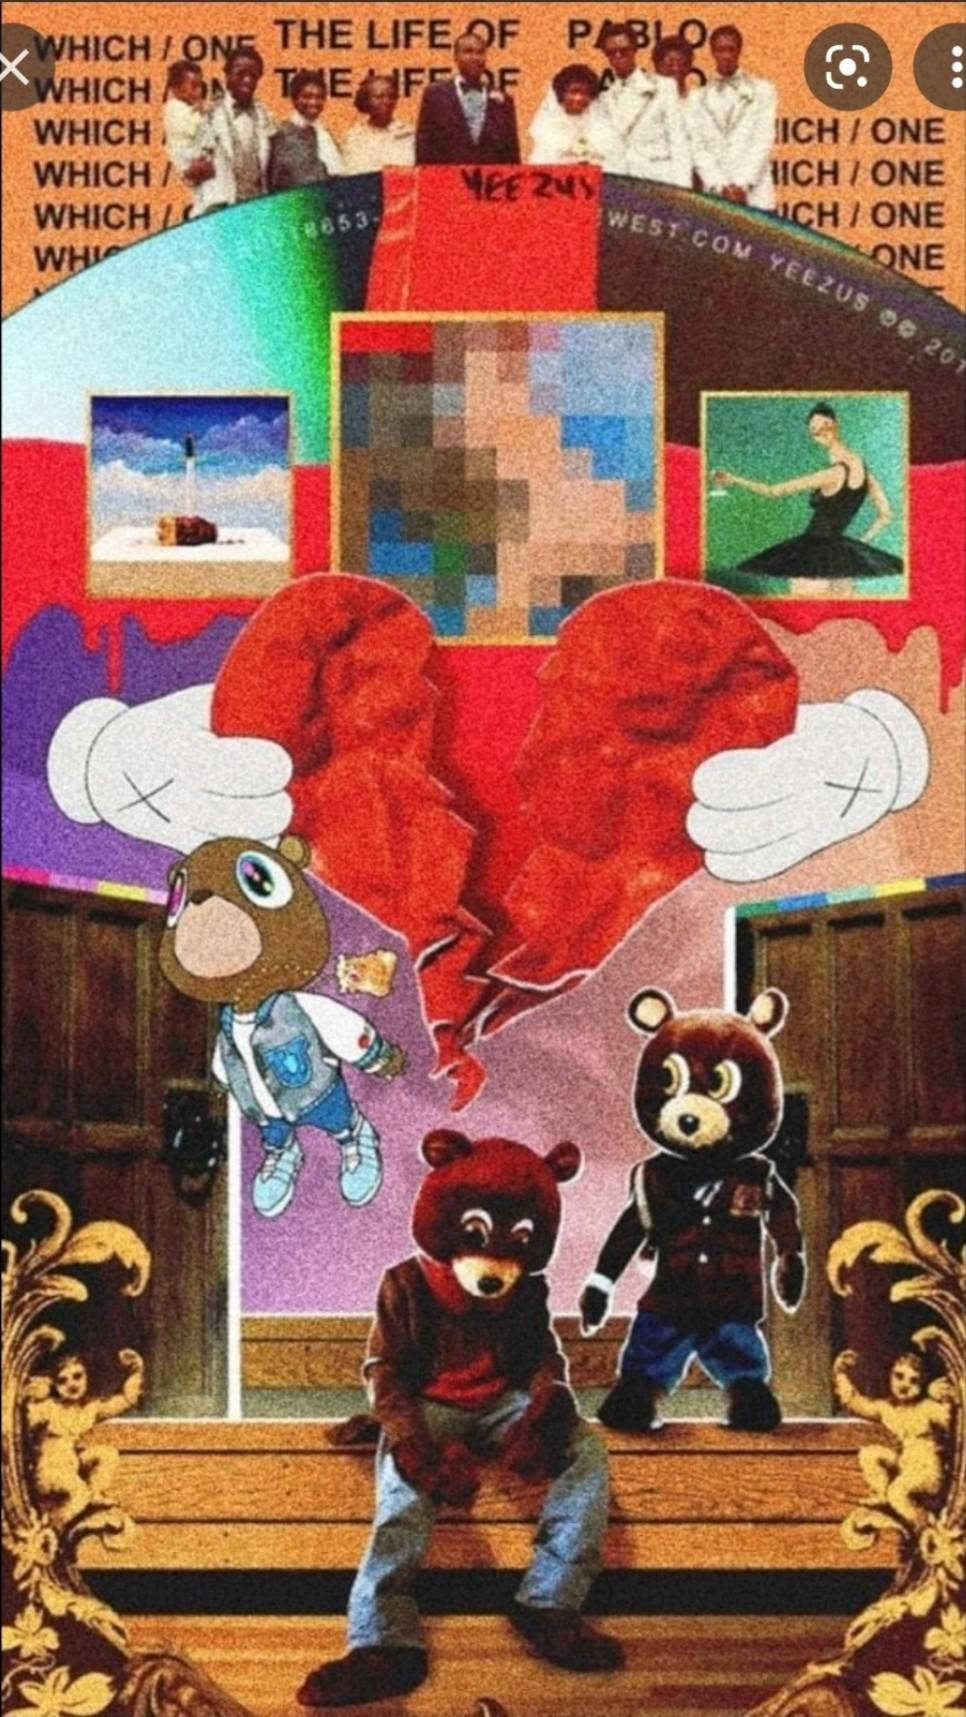 "kanye West's New Album Cover" Wallpaper